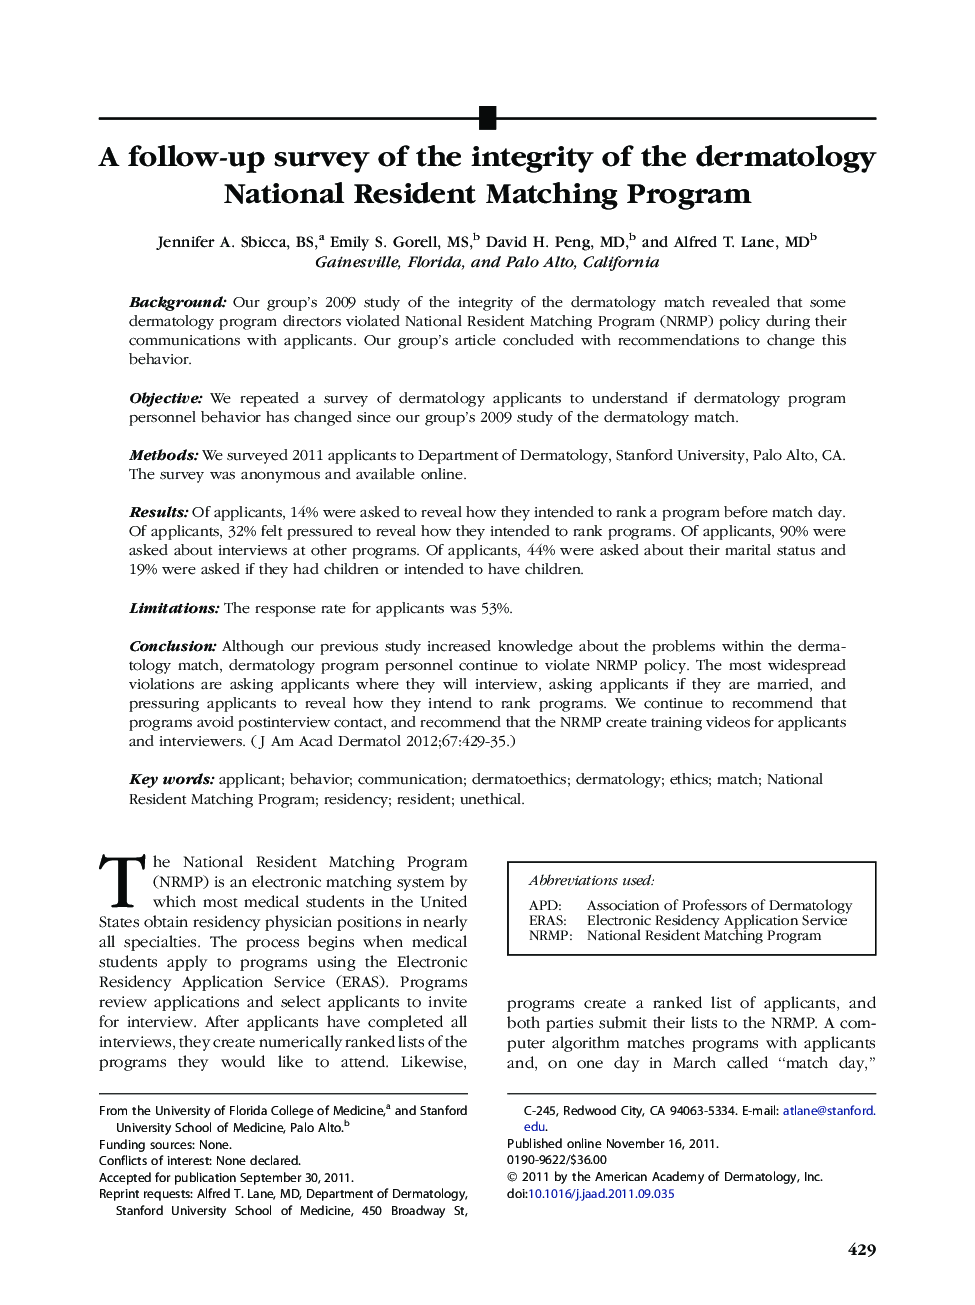 A follow-up survey of the integrity of the dermatology National Resident Matching Program 